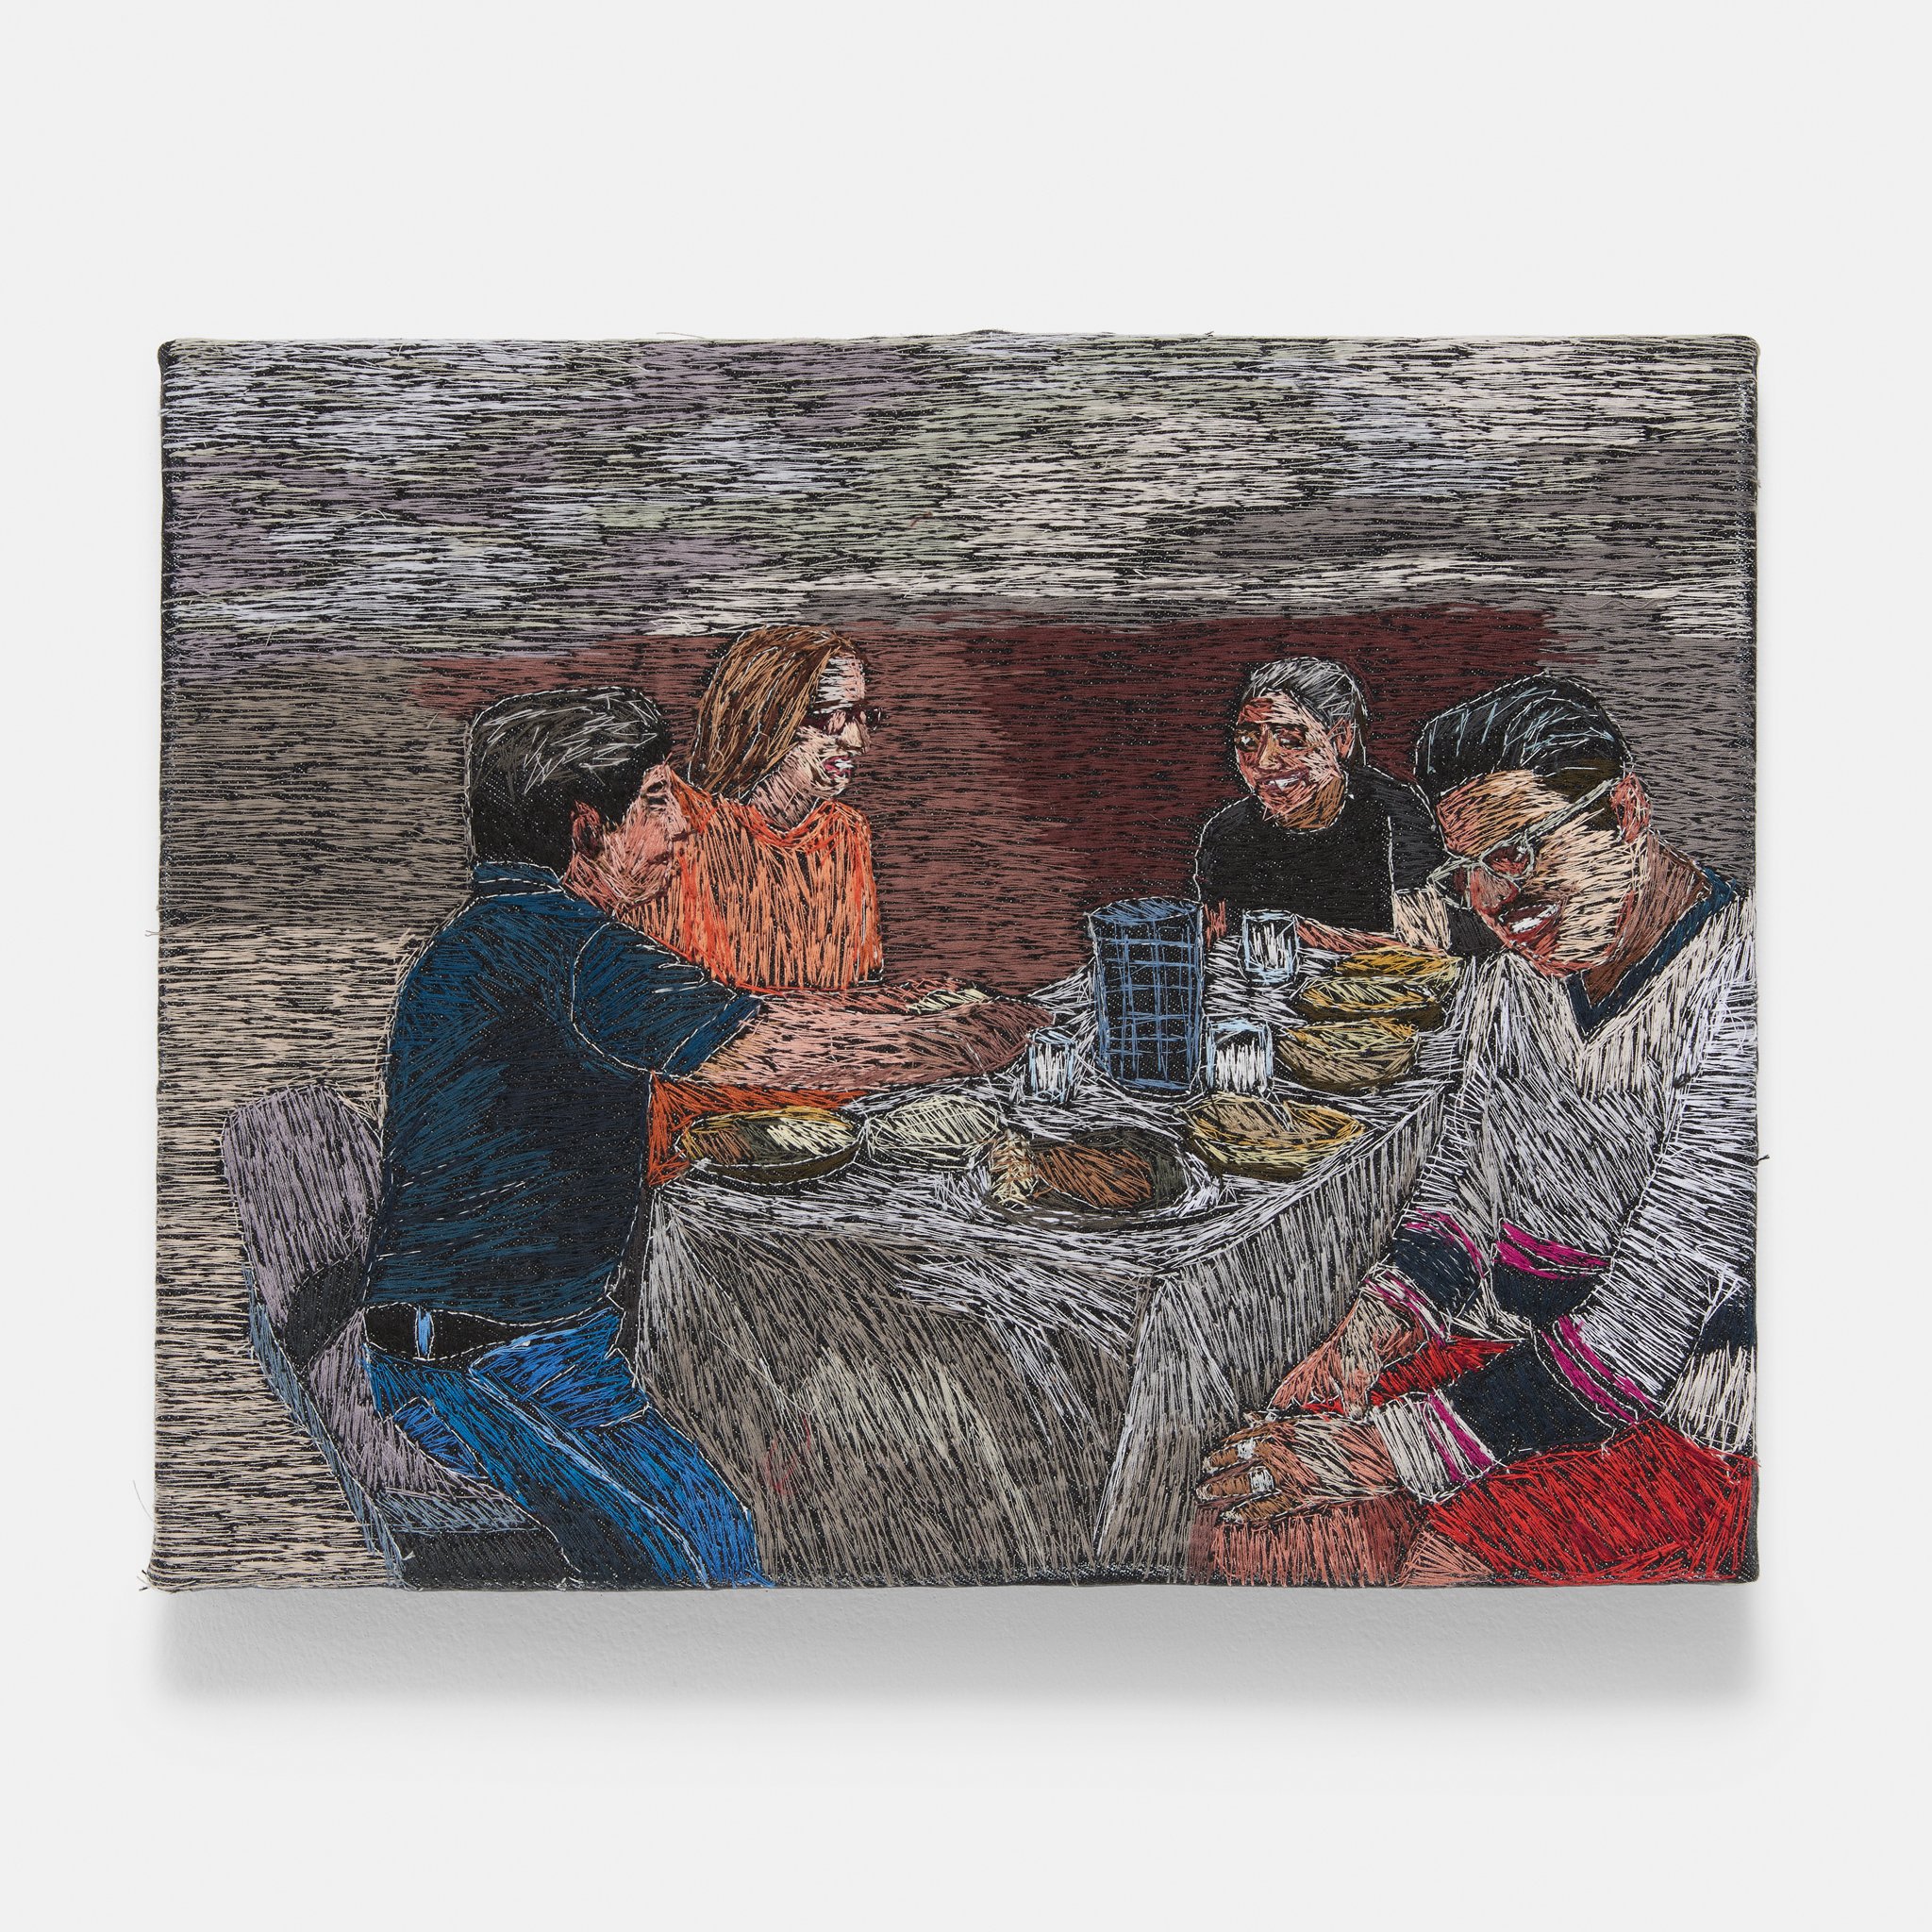  Carne Asada at my parent’s (smile for the camera), 2022  11 1/5 × 14 1/10 × 1 7/10 in  Polyester thread on denim 